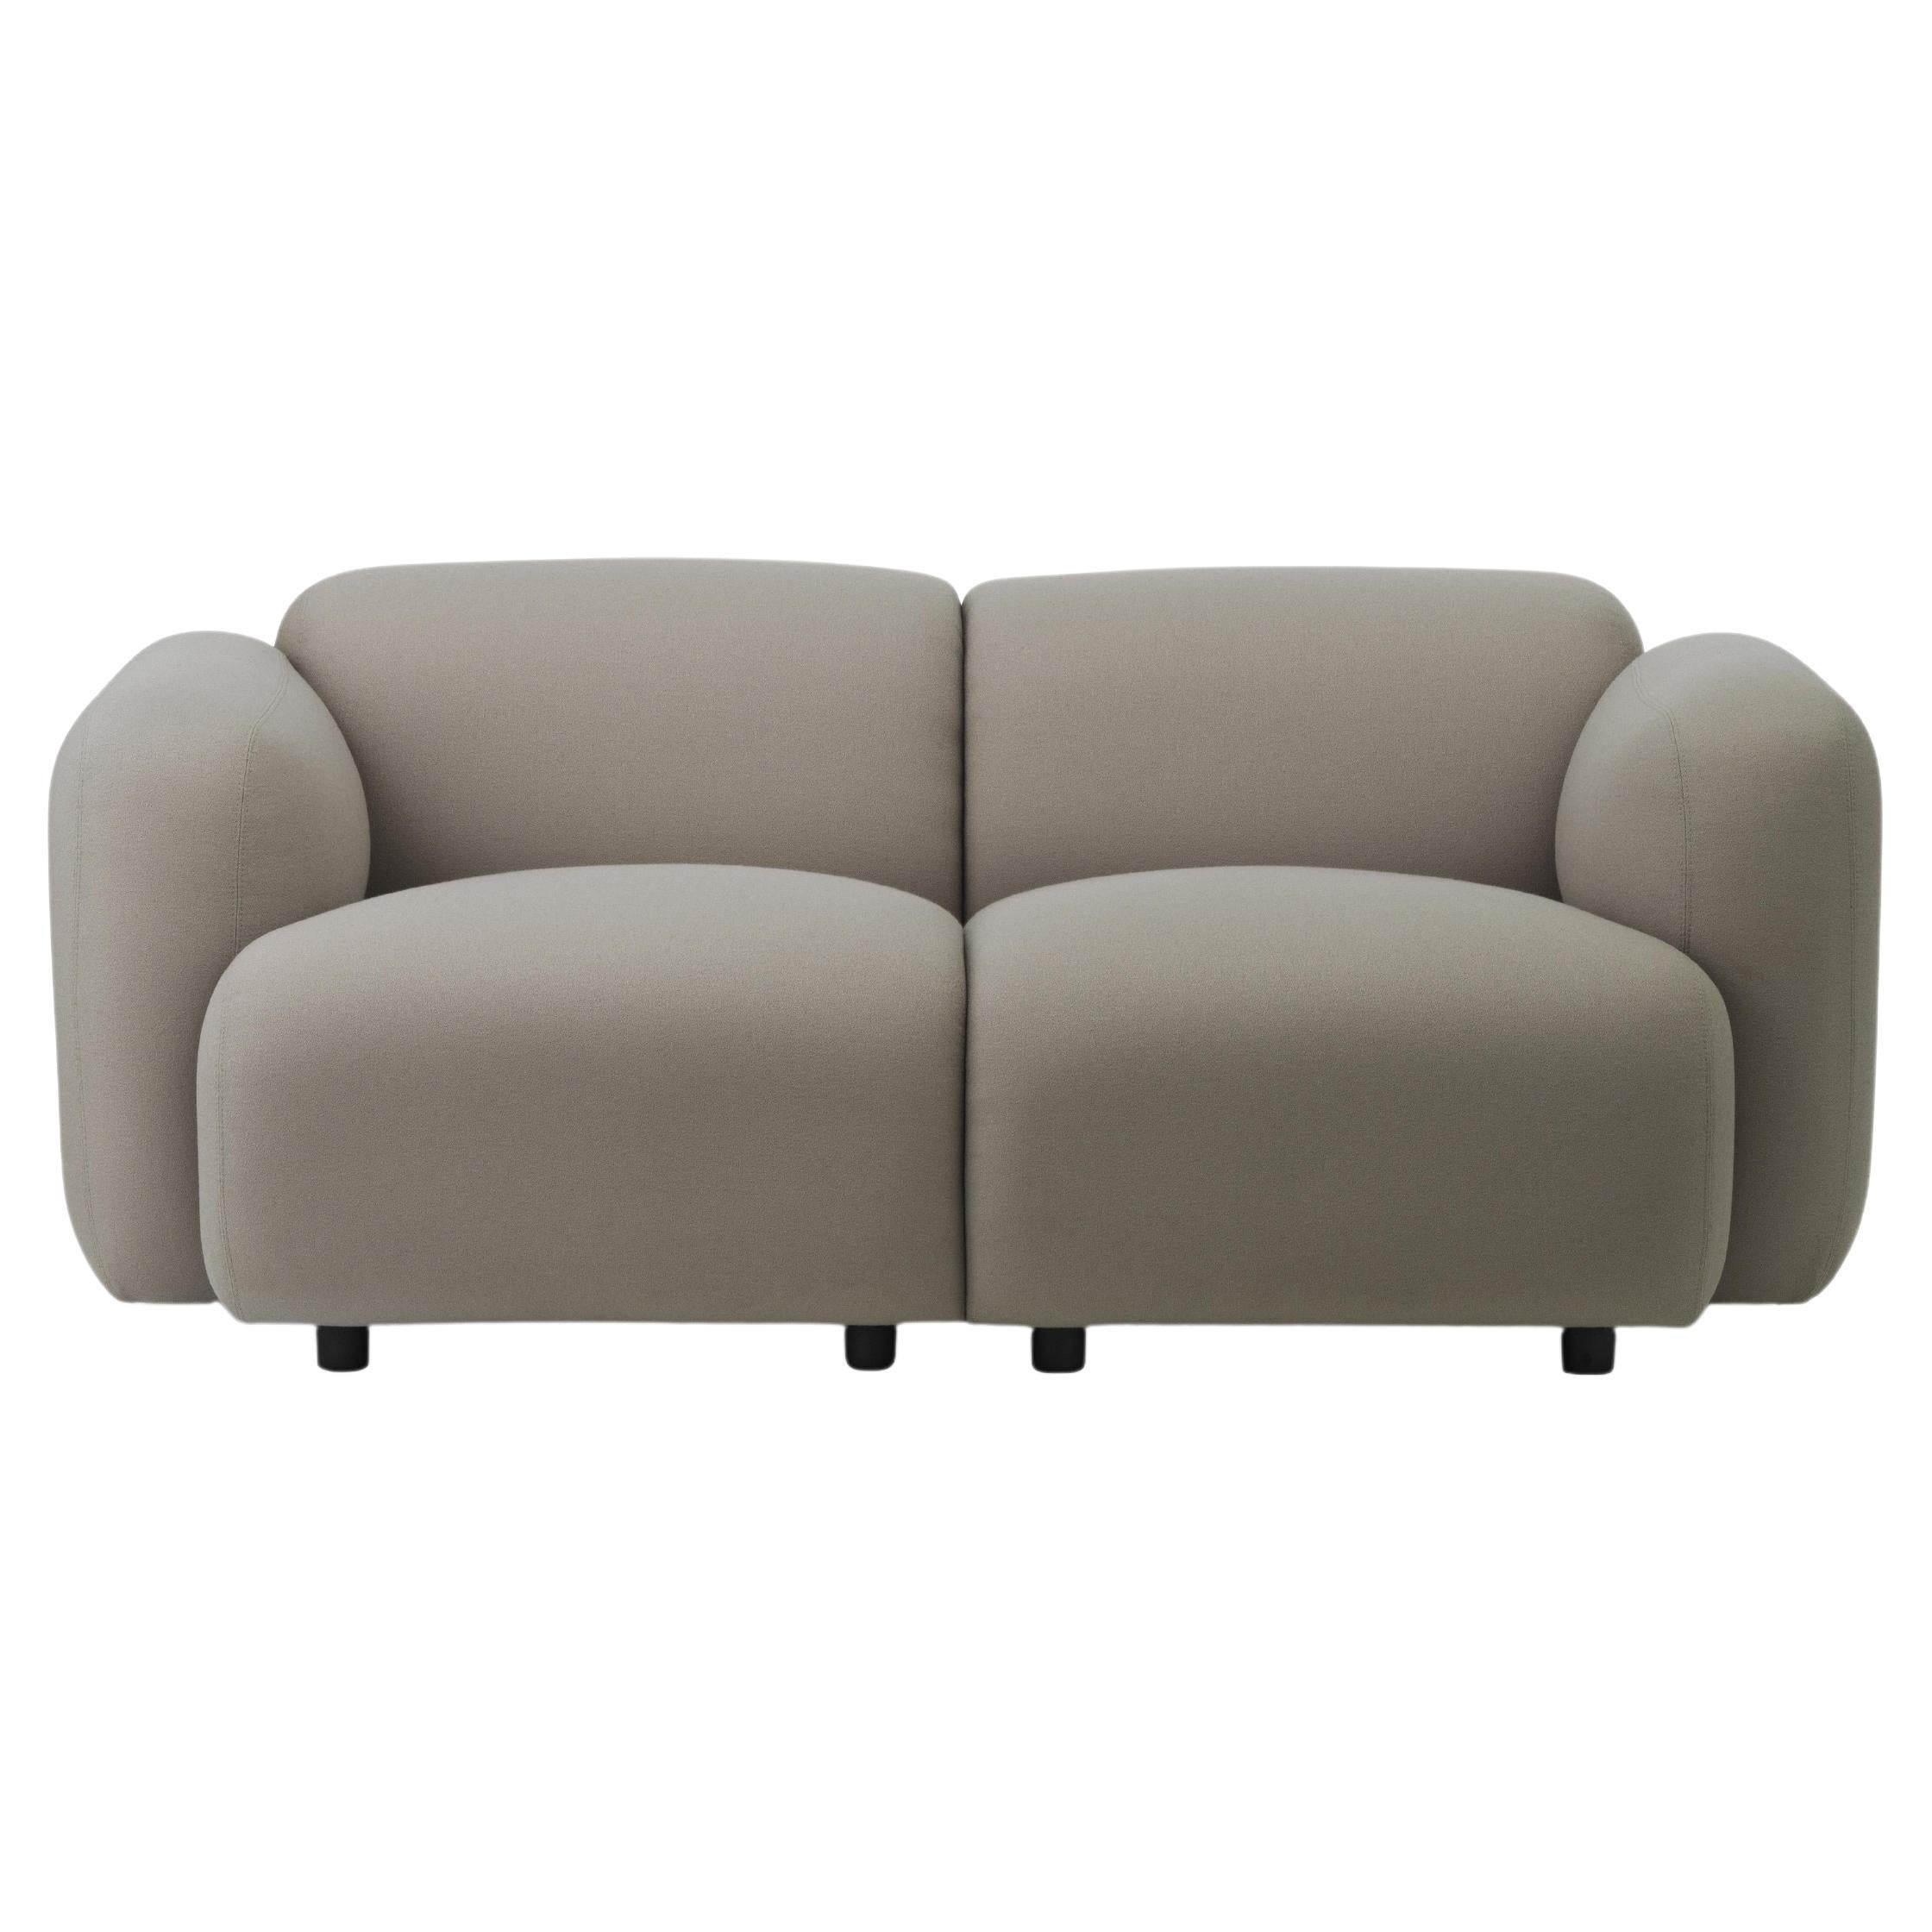 Swell Sofa
Swell is a minimalistic collection of furniture for the living room with a playful, light-hearted feel. The soft, curved silhouettes give the furniture pieces an inviting look and ensure a fantastic sitting comfort. 
The name Swell is a